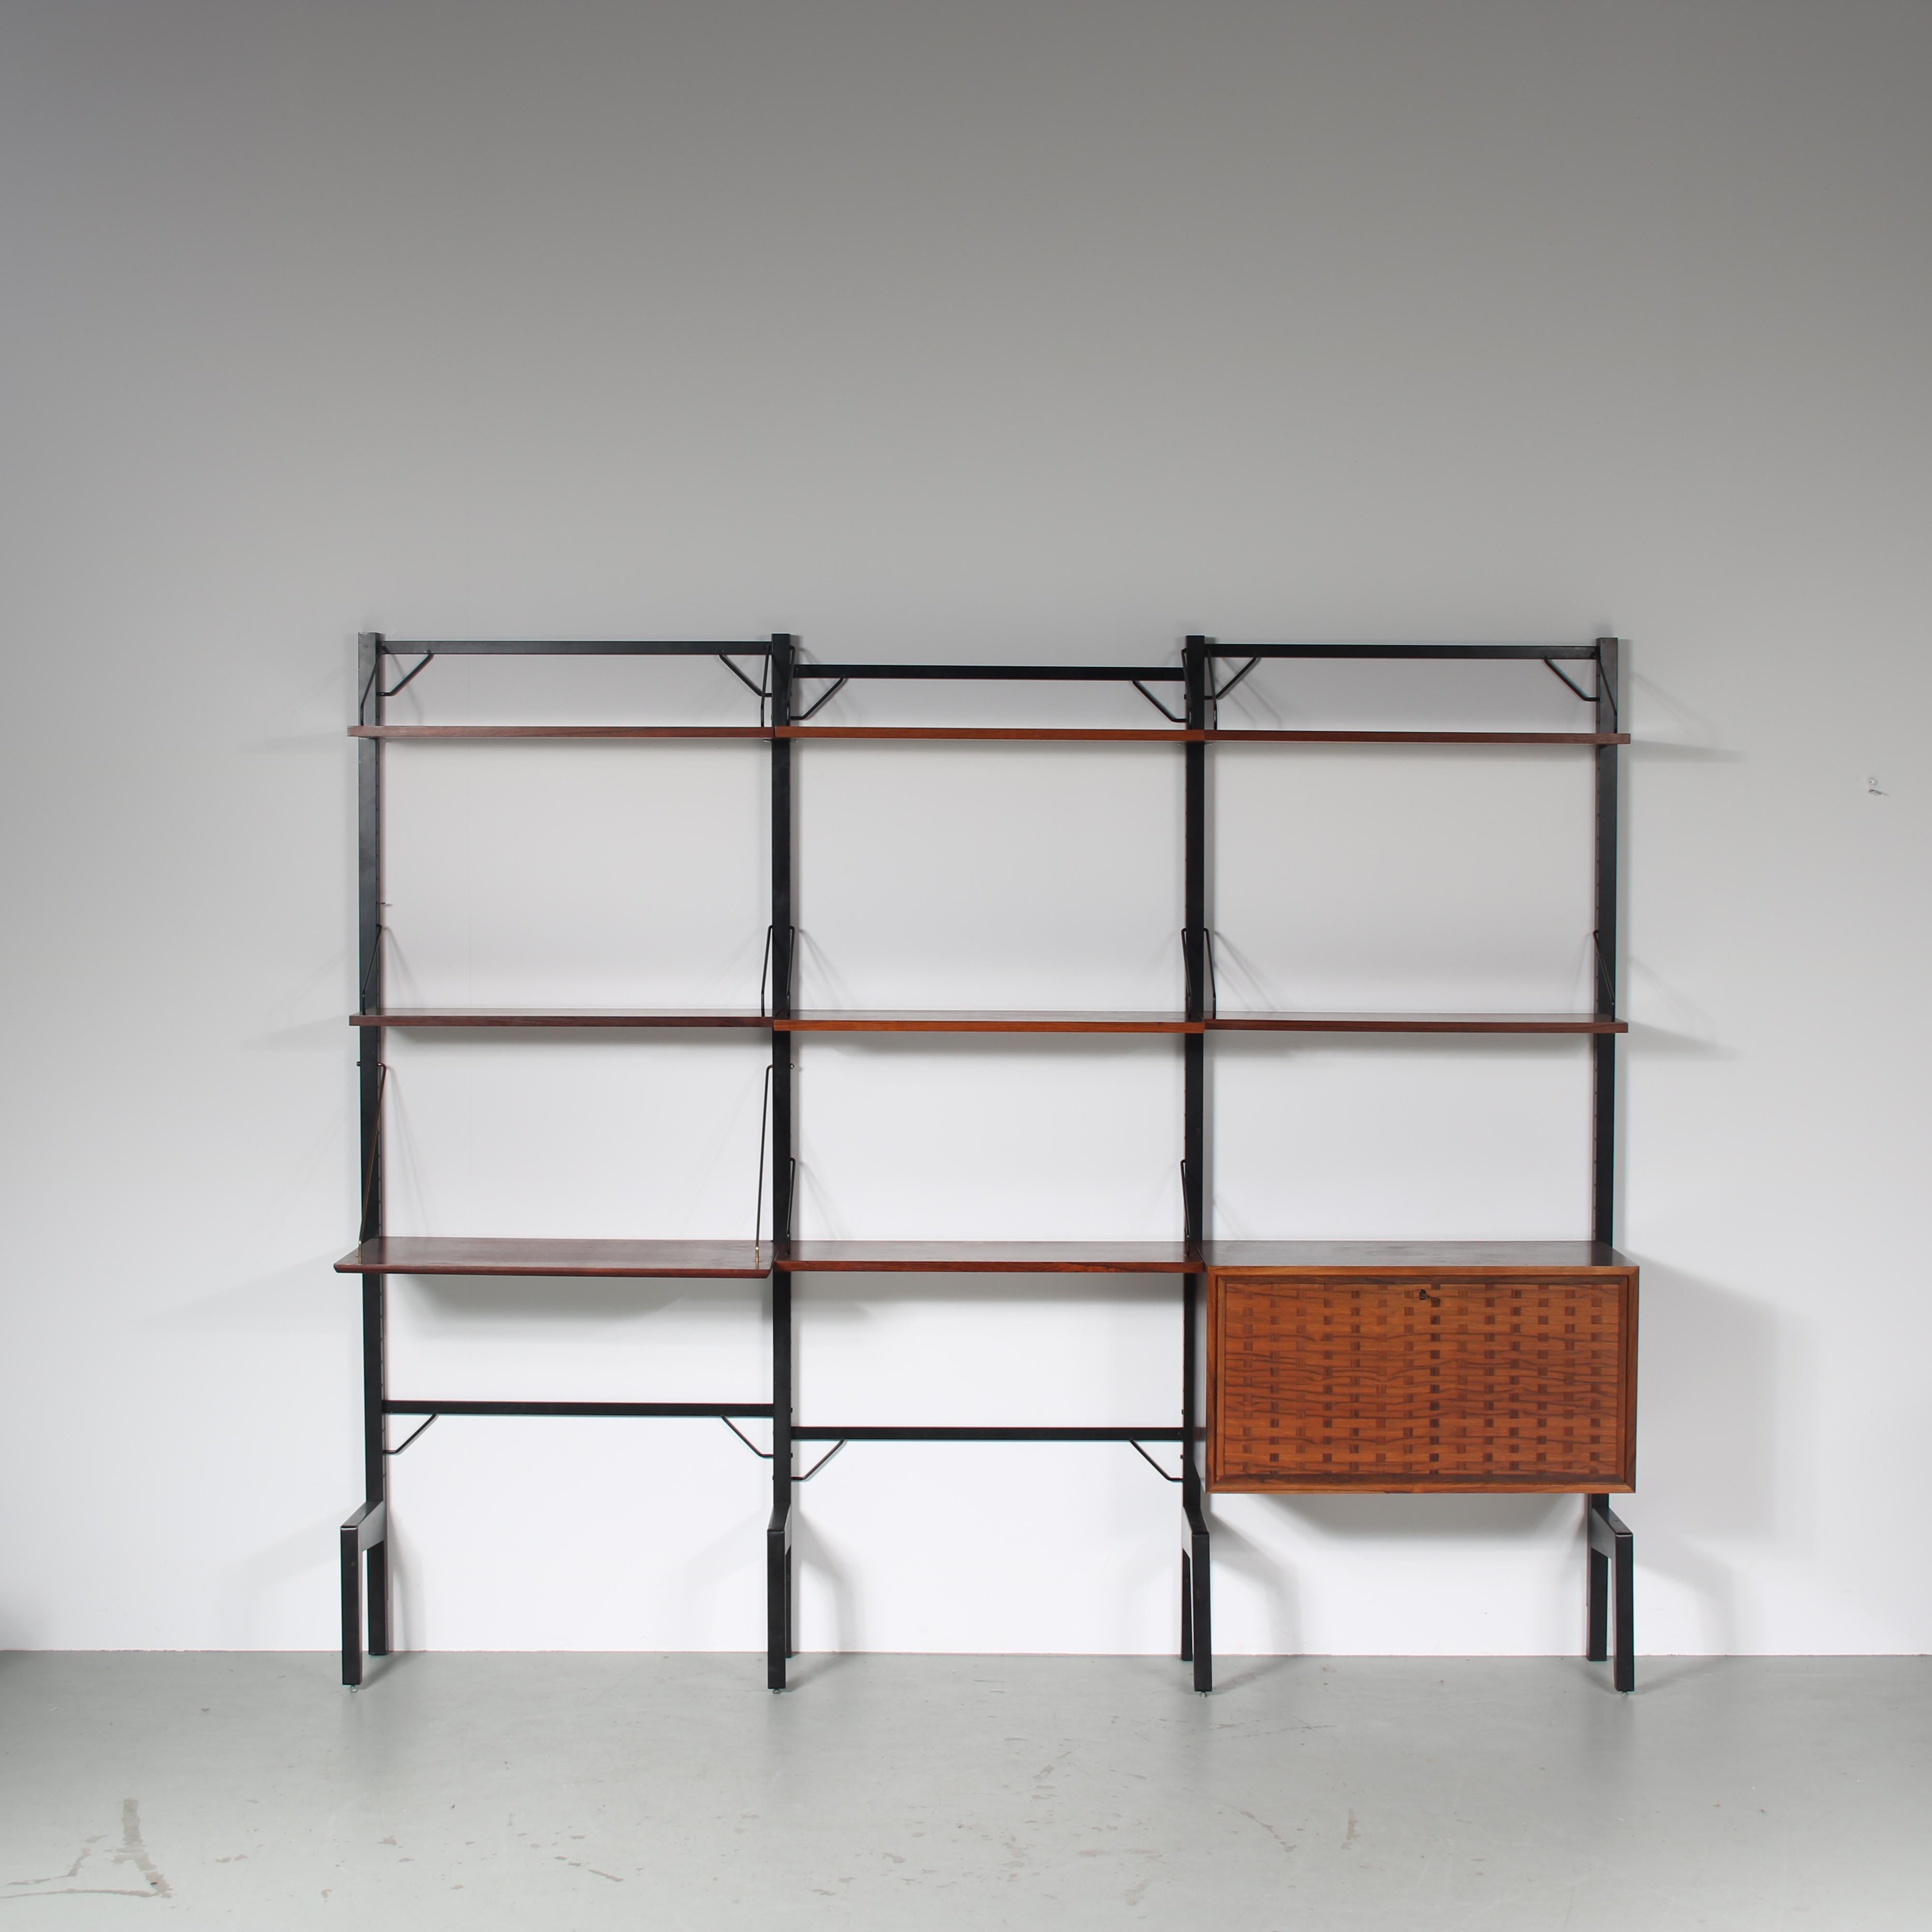 An eye-catching wall mounted system cabinet designed by Poul Cadovius, manufactured by Royal System in Denmark around 1960.

A beautiful piece made of wood in a warm brown colour. It is three units wide, having multiple shelves held by elegant black